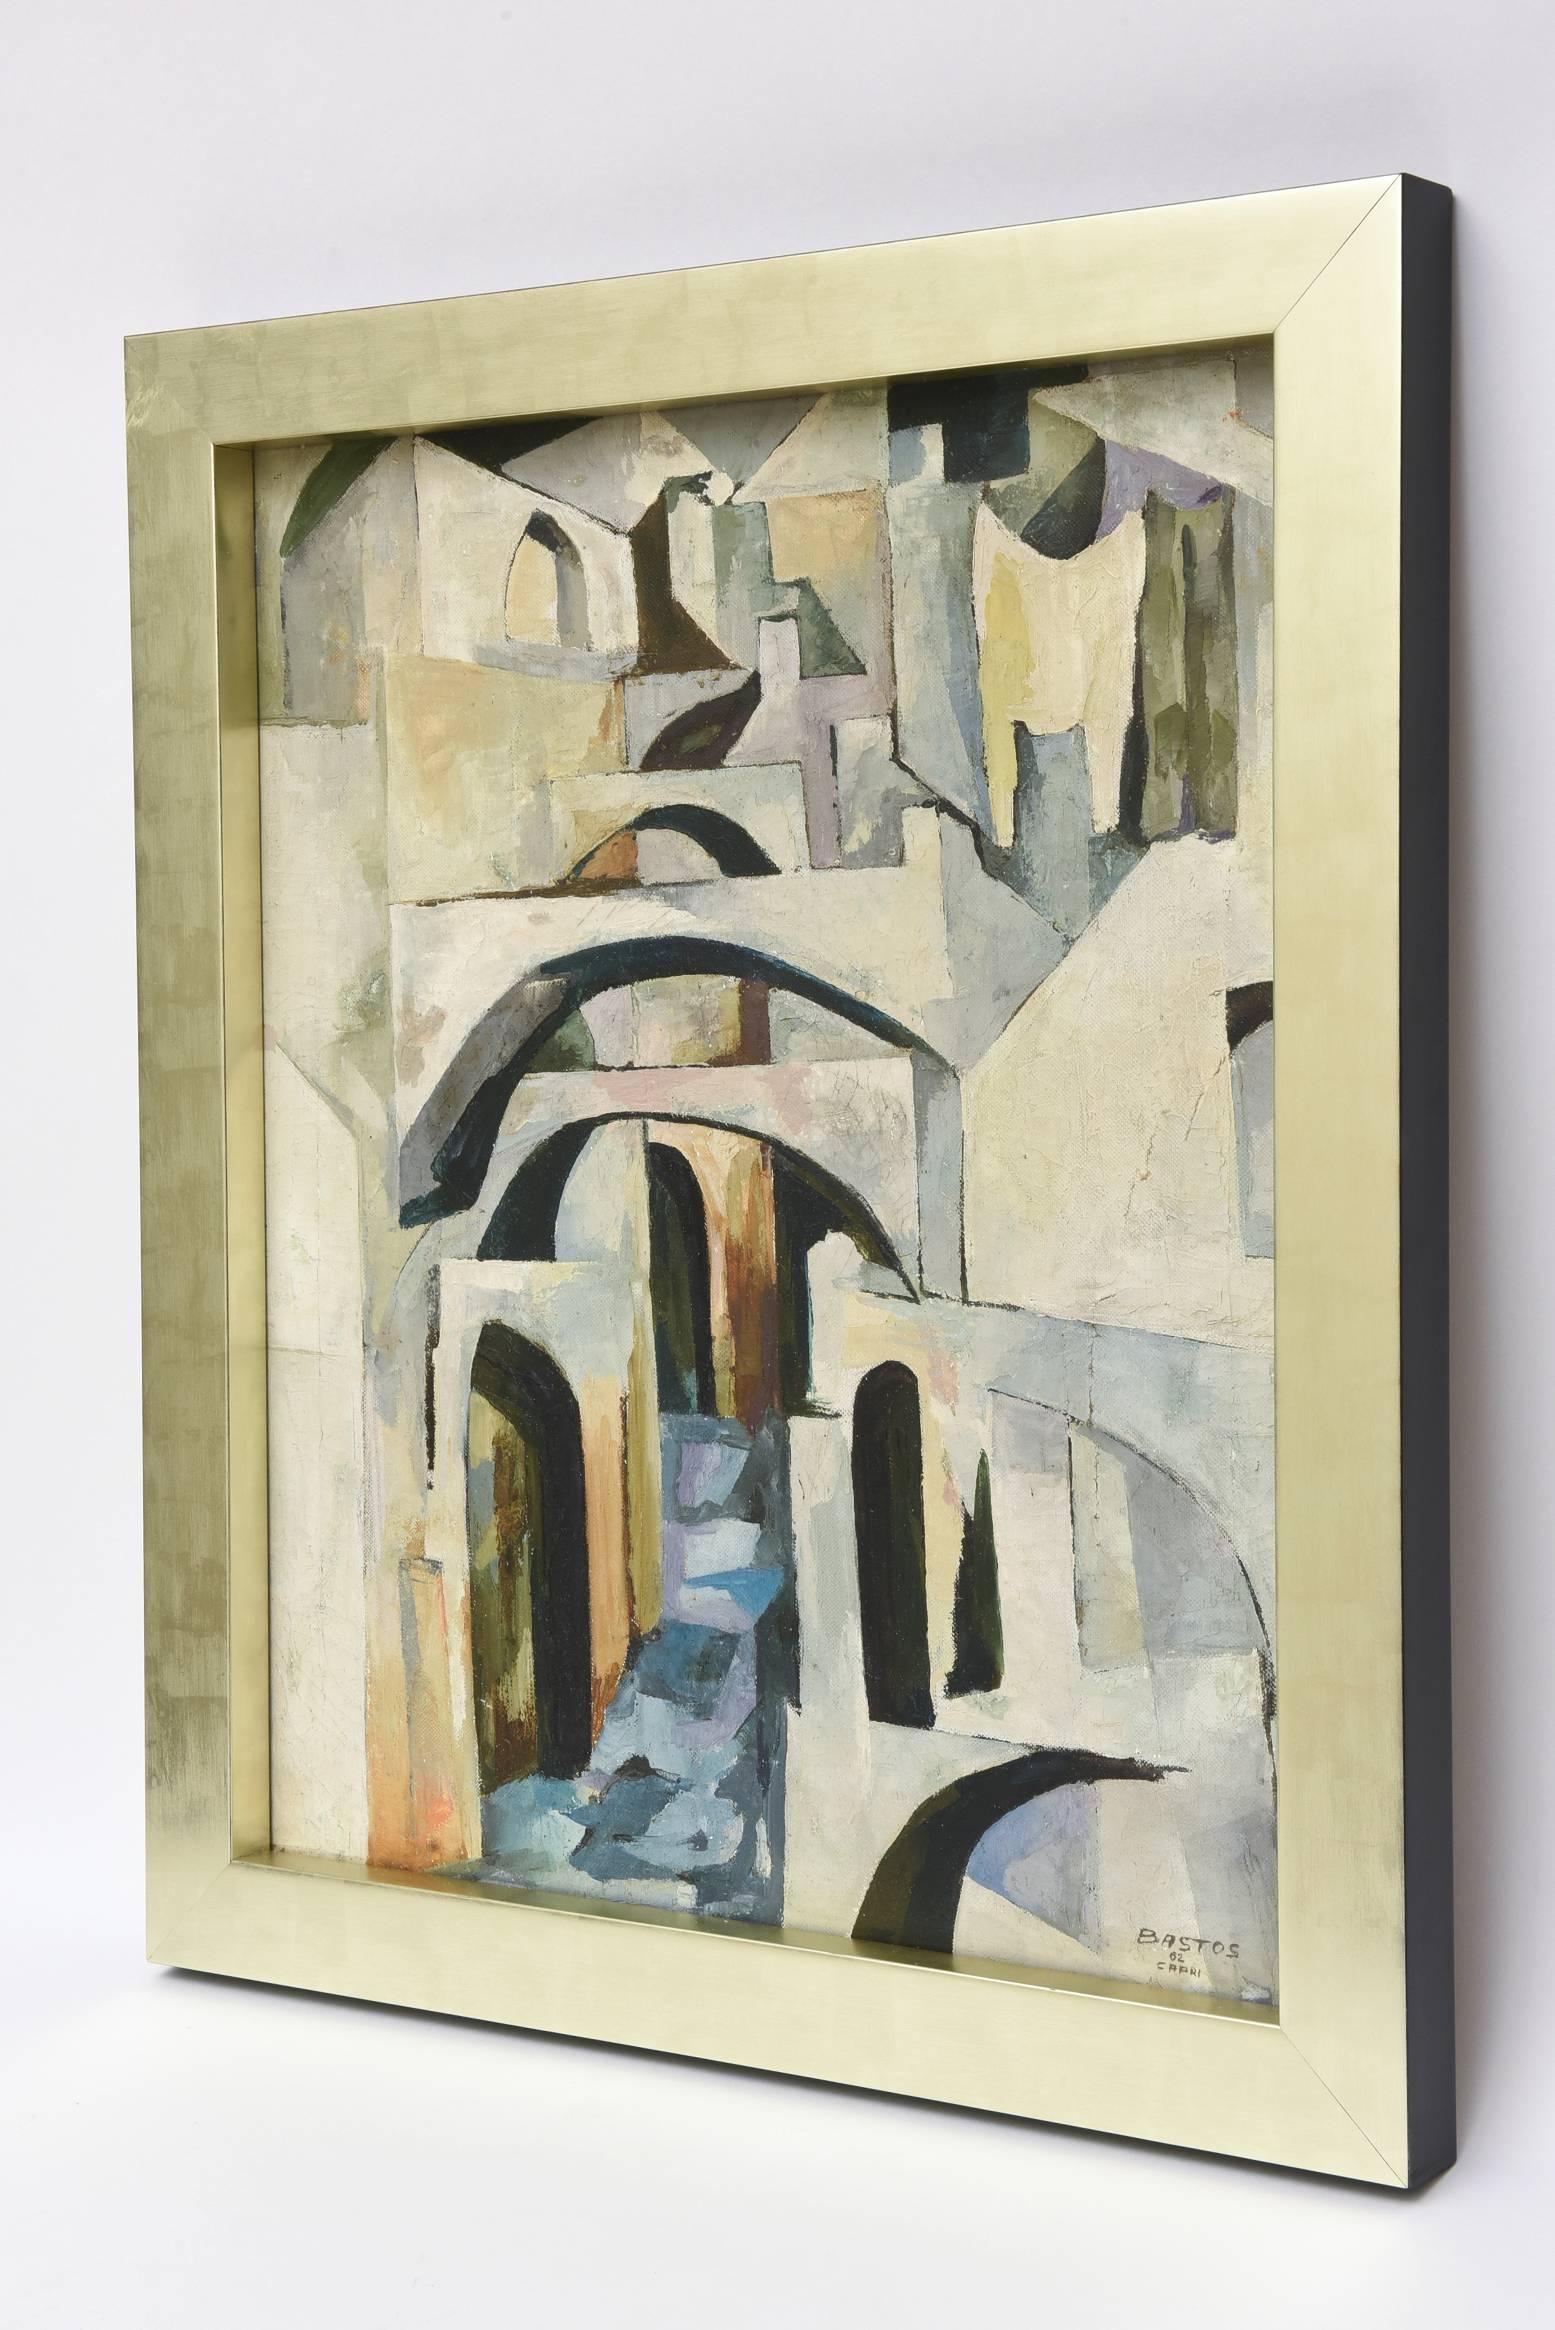 This delightful Mid-Century painting by Bastos done in 1962 epitomizes the streets of Capri.
You feel yourself meandering thru the tiny hilly cobblestone streets getting lost, and discovering.
It is entitled "capri."
It has been newly